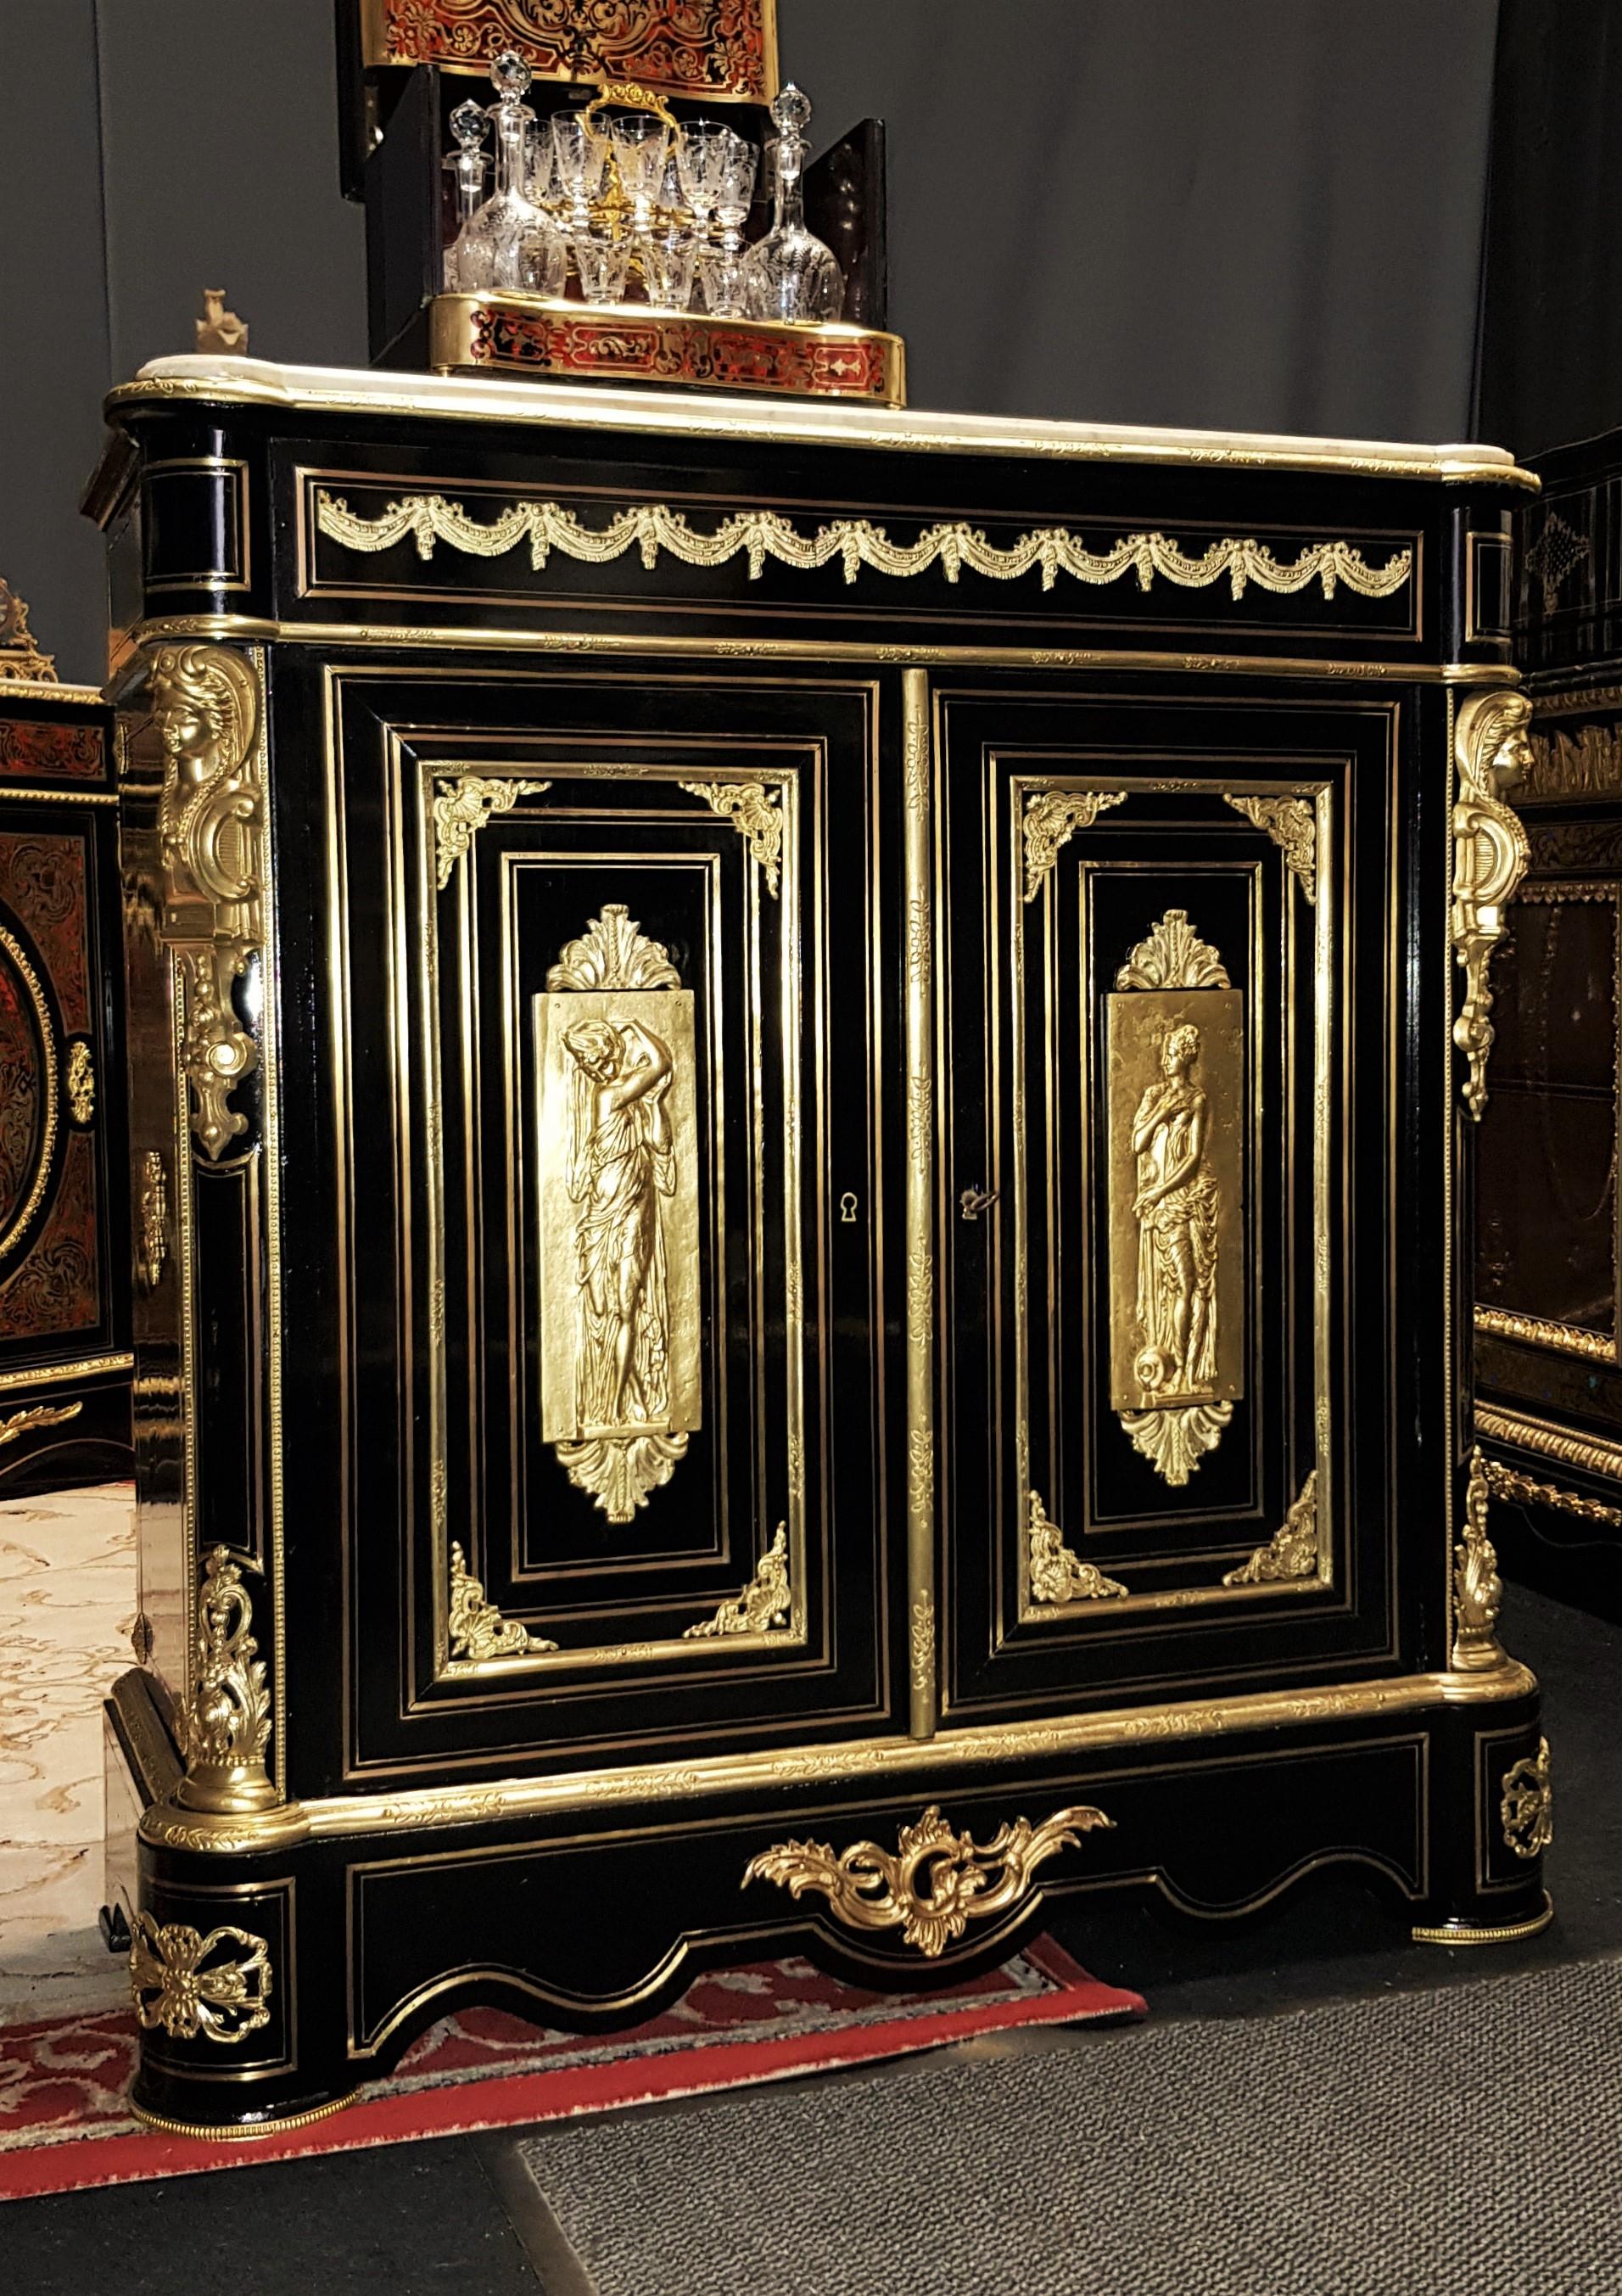 Rare cabinet in blackened pear tree wood and Boulle Marquetry with brass ornamentations. With important and rich gilt bronze ornamentations.
On the doors made in an ancient style decoration, 2 plaques in bronze representing the vestal virgins, the